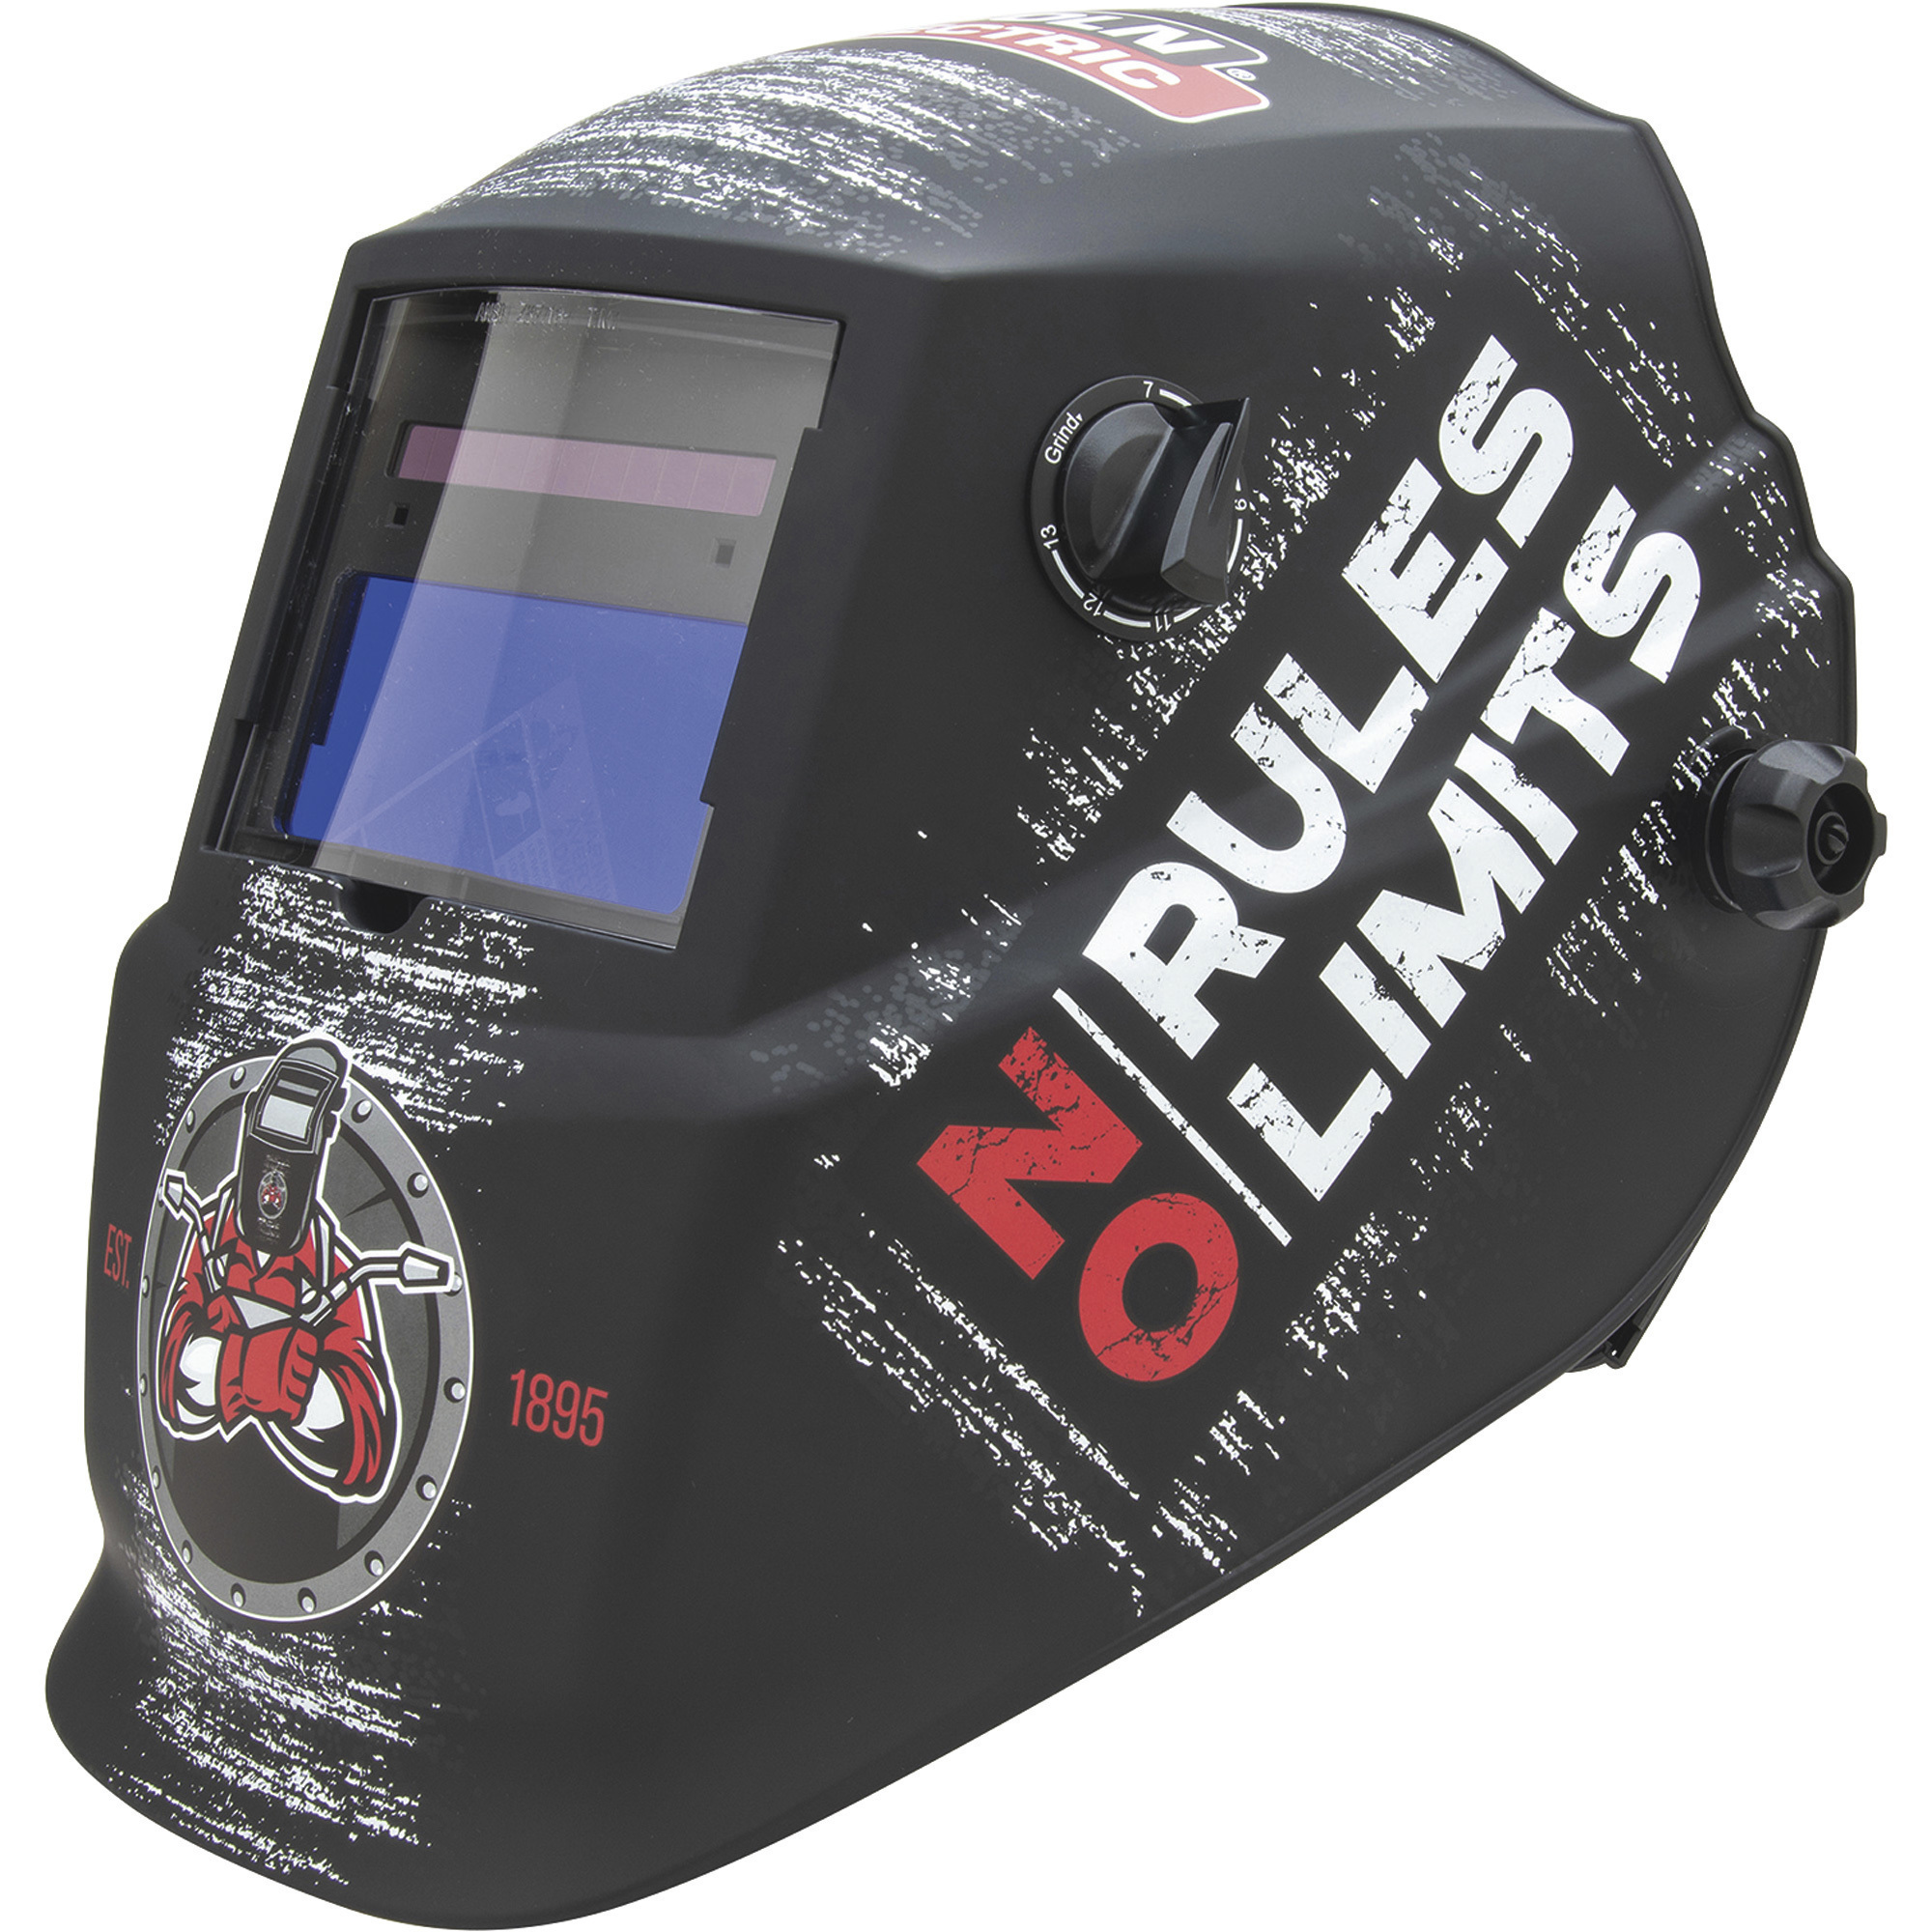 Lincoln Electric Auto-Darkening Welding Helmet with Grind Mode, No Rules/No Limits Design, Model K4983-1